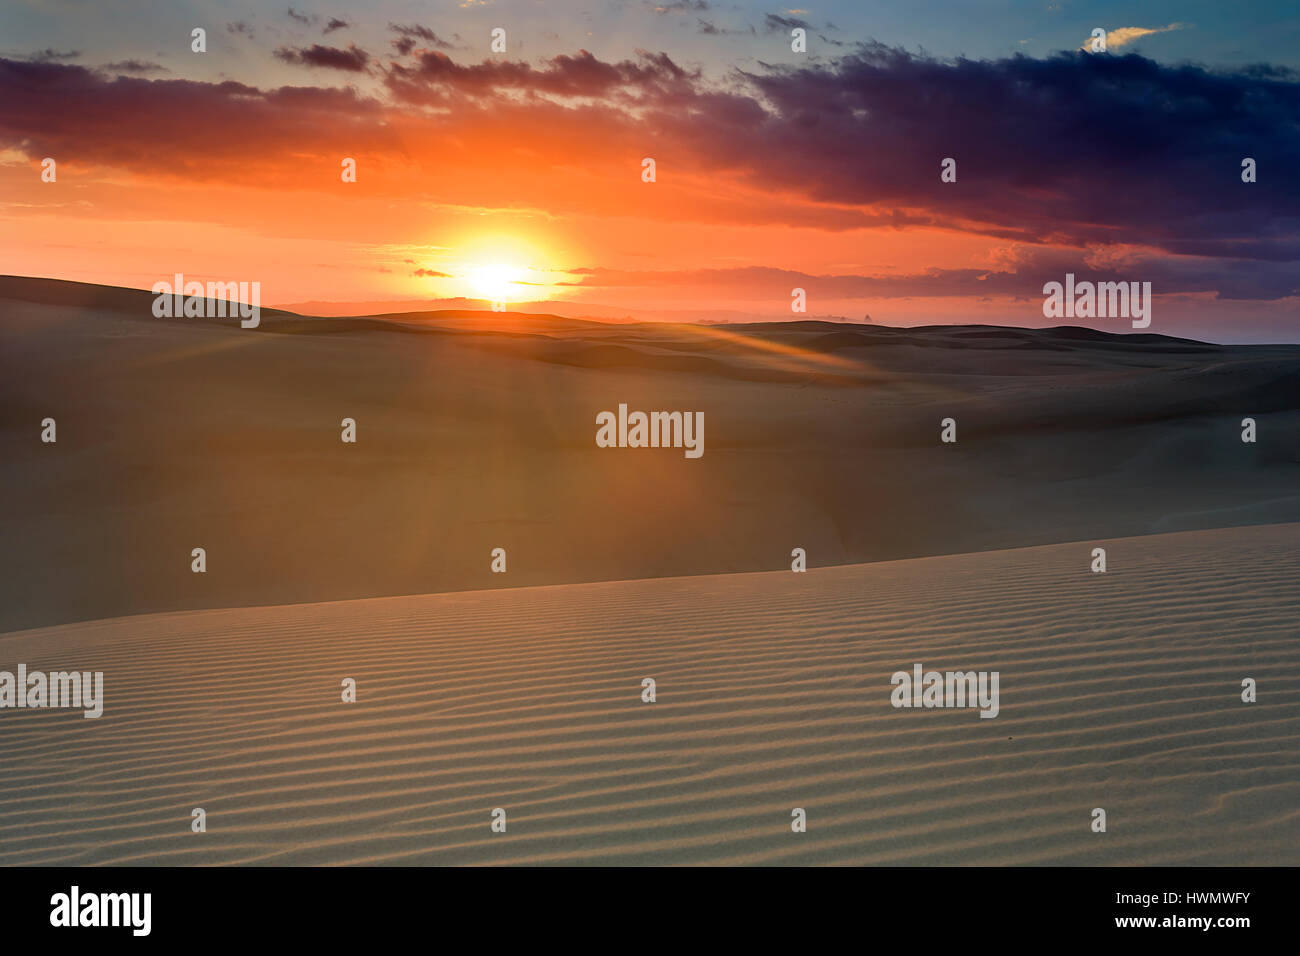 Bright rising sun over land horizon in sand dunes of Stockton beach, NSW, Australia. Striped structure of soft sand hills under gentle warm beams of s Stock Photo